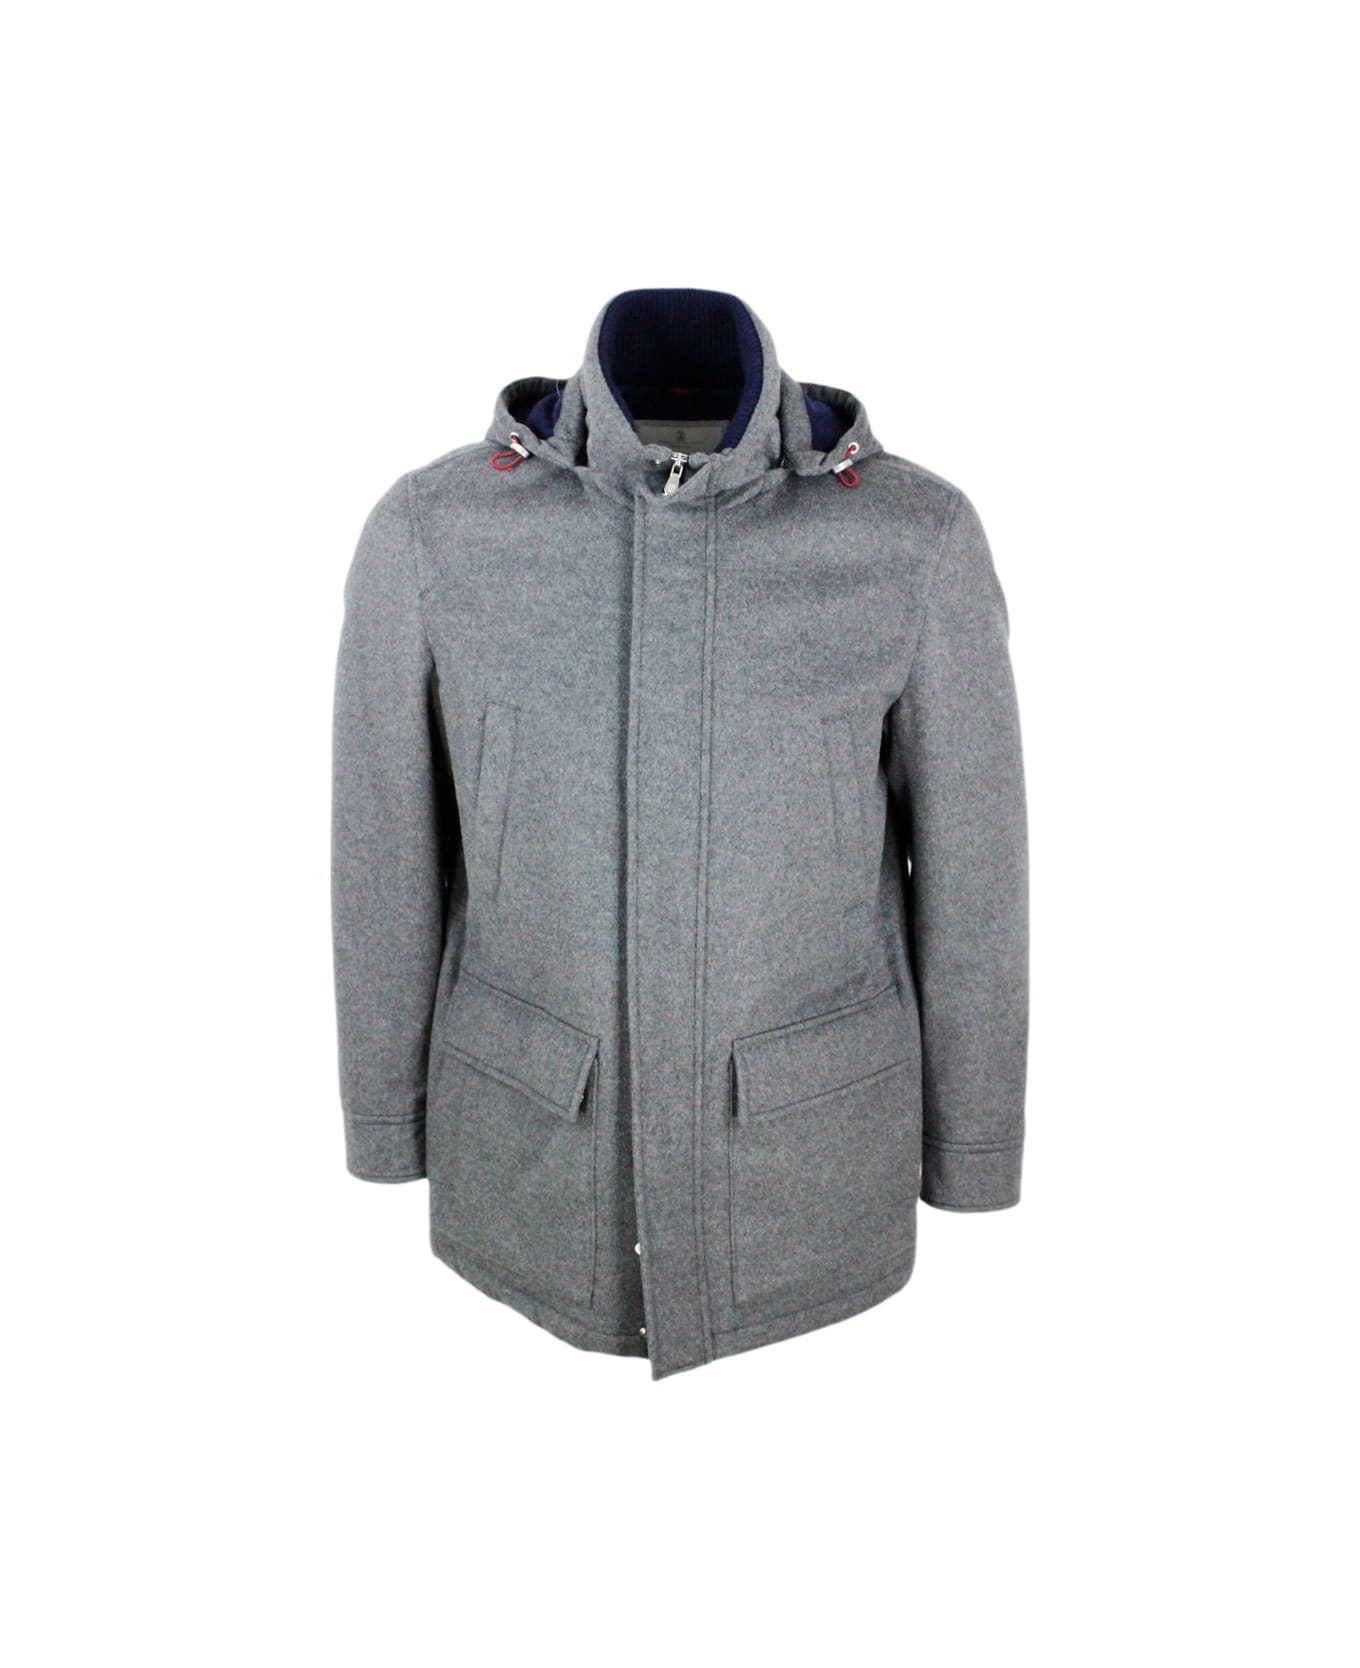 Brunello Cucinelli Cashmere Down Jacket Padded With Real Goose Down With Detachable Hood And Zip And Button Closure - Grey ダウンジャケット